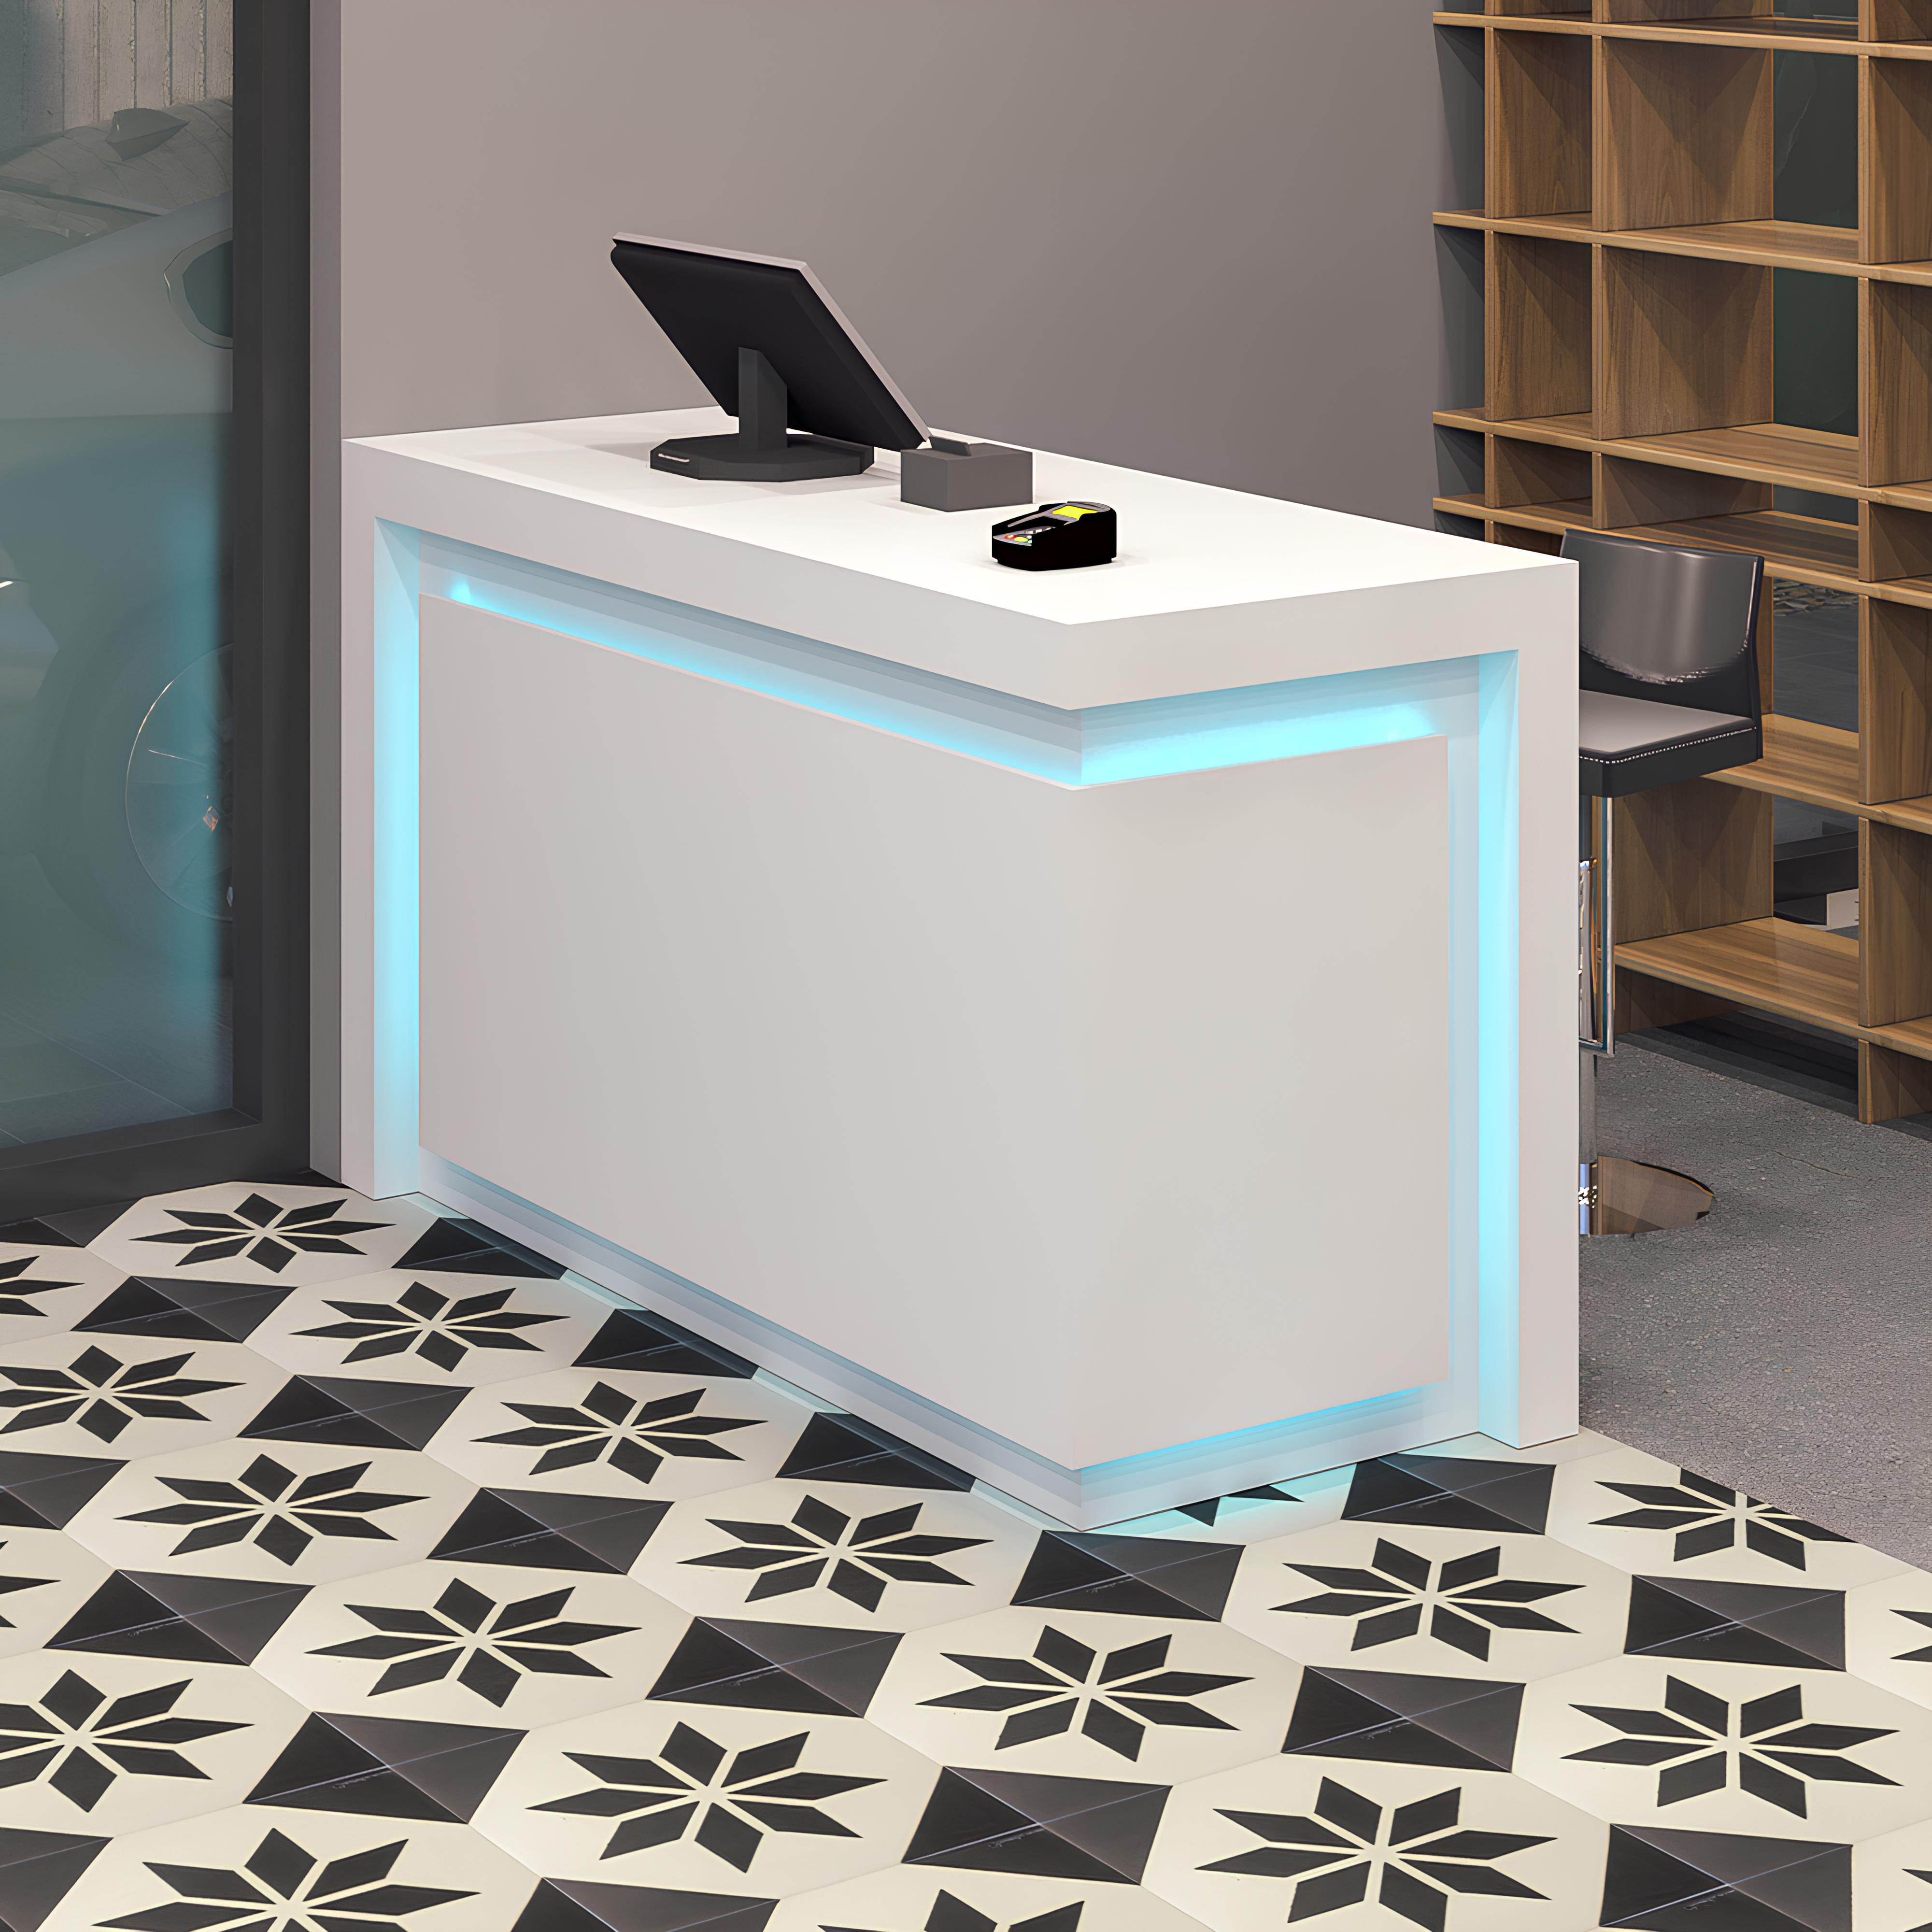 60-inch New York L-Shape Retail Custom Reception Desk in white gloss laminate desk, with color LED, shown here.